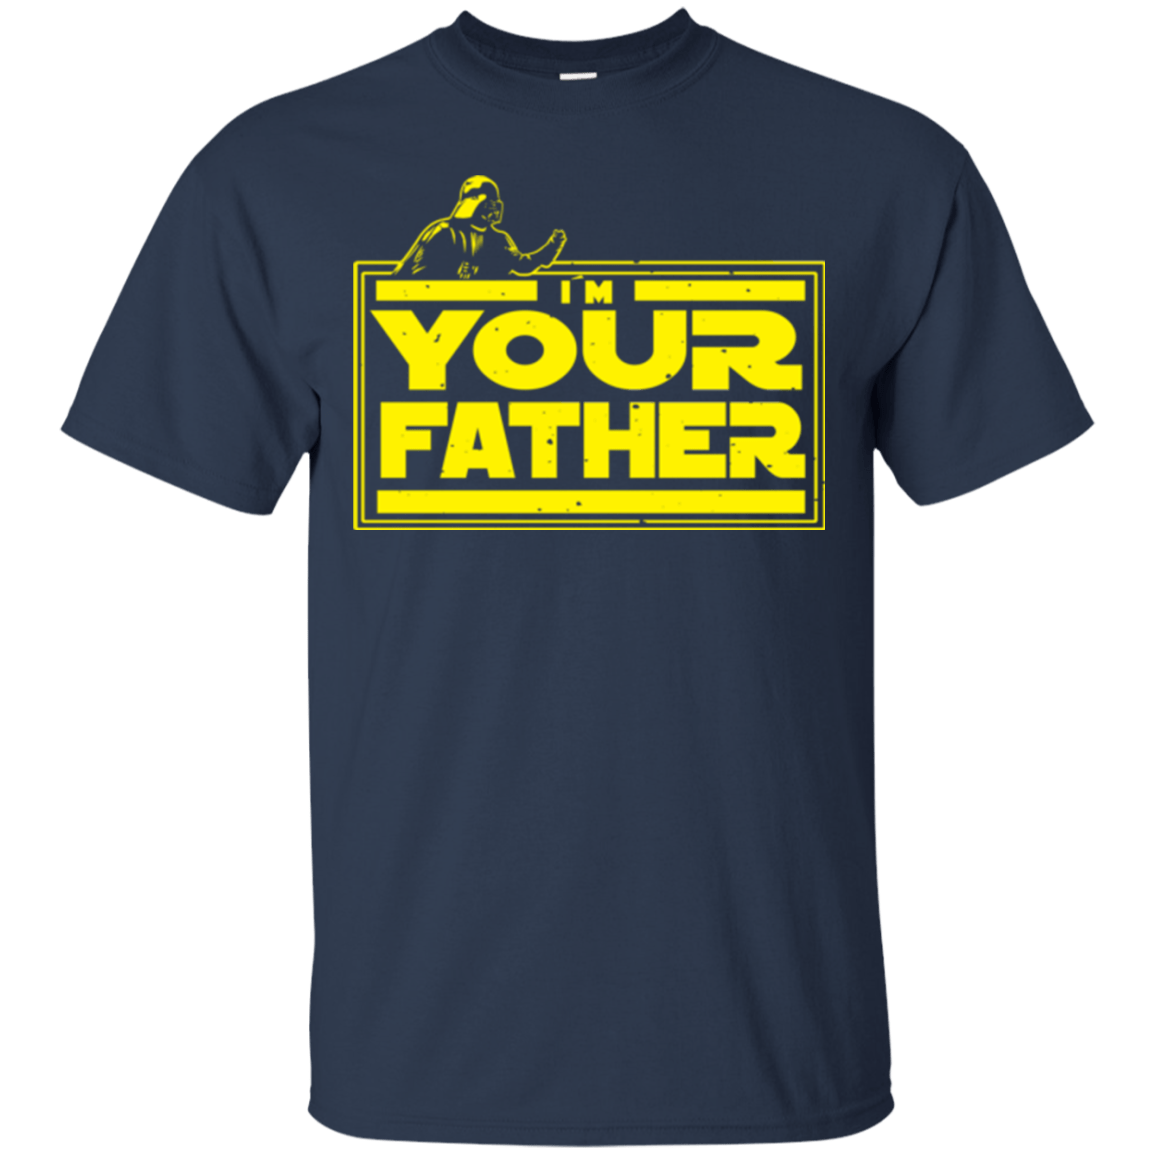 T-Shirts Navy / Small I M Your Father T-Shirt